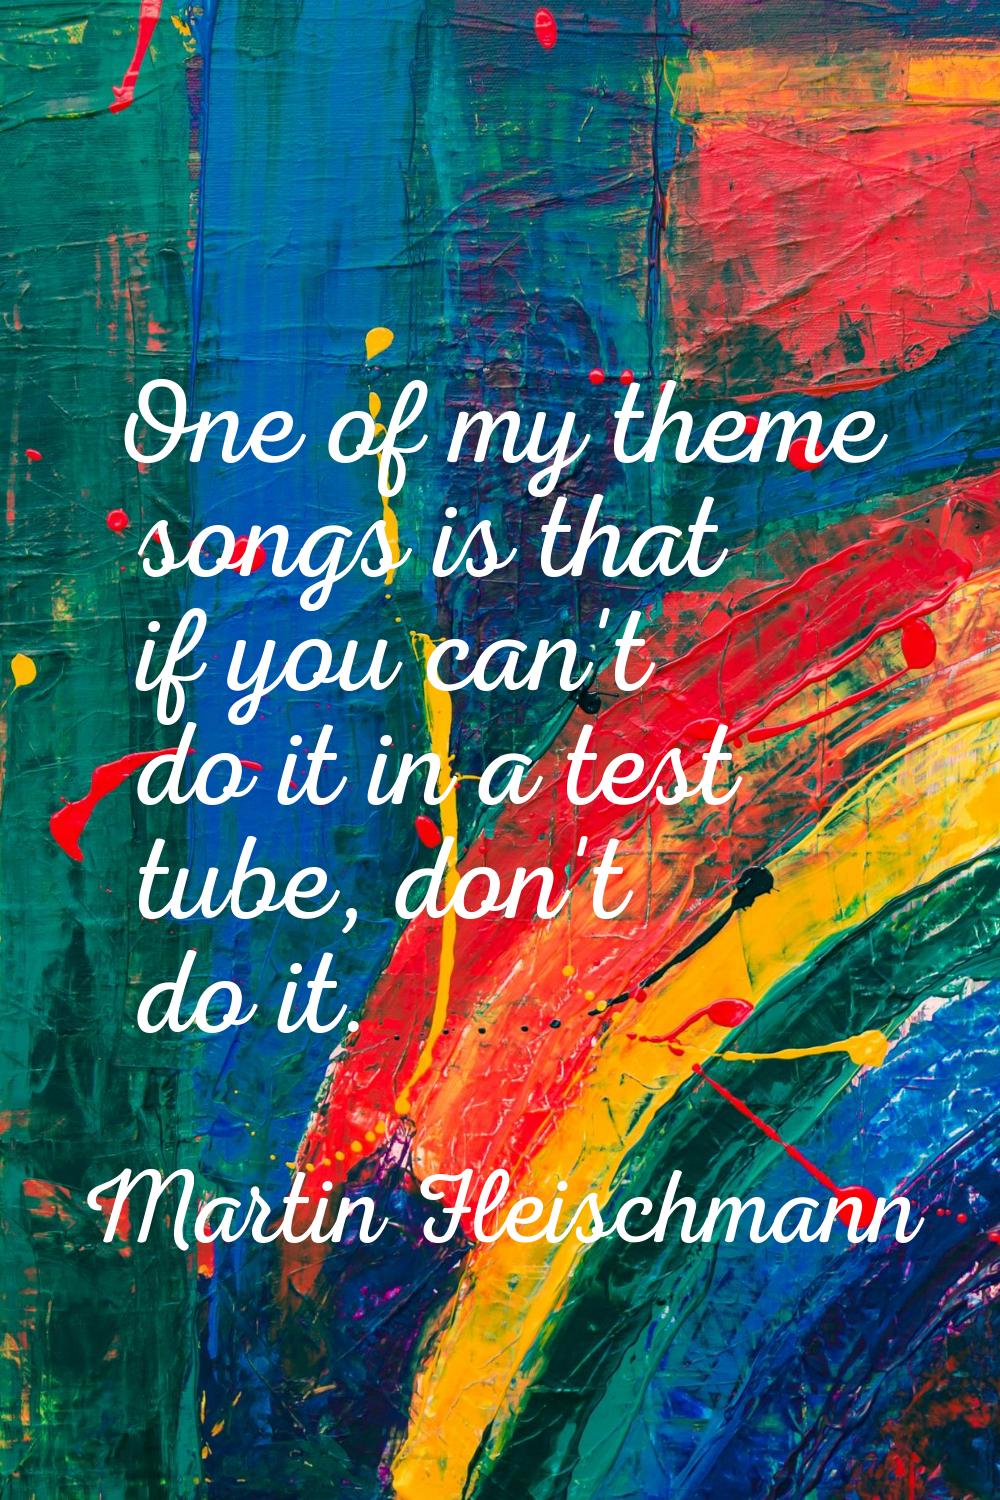 One of my theme songs is that if you can't do it in a test tube, don't do it.